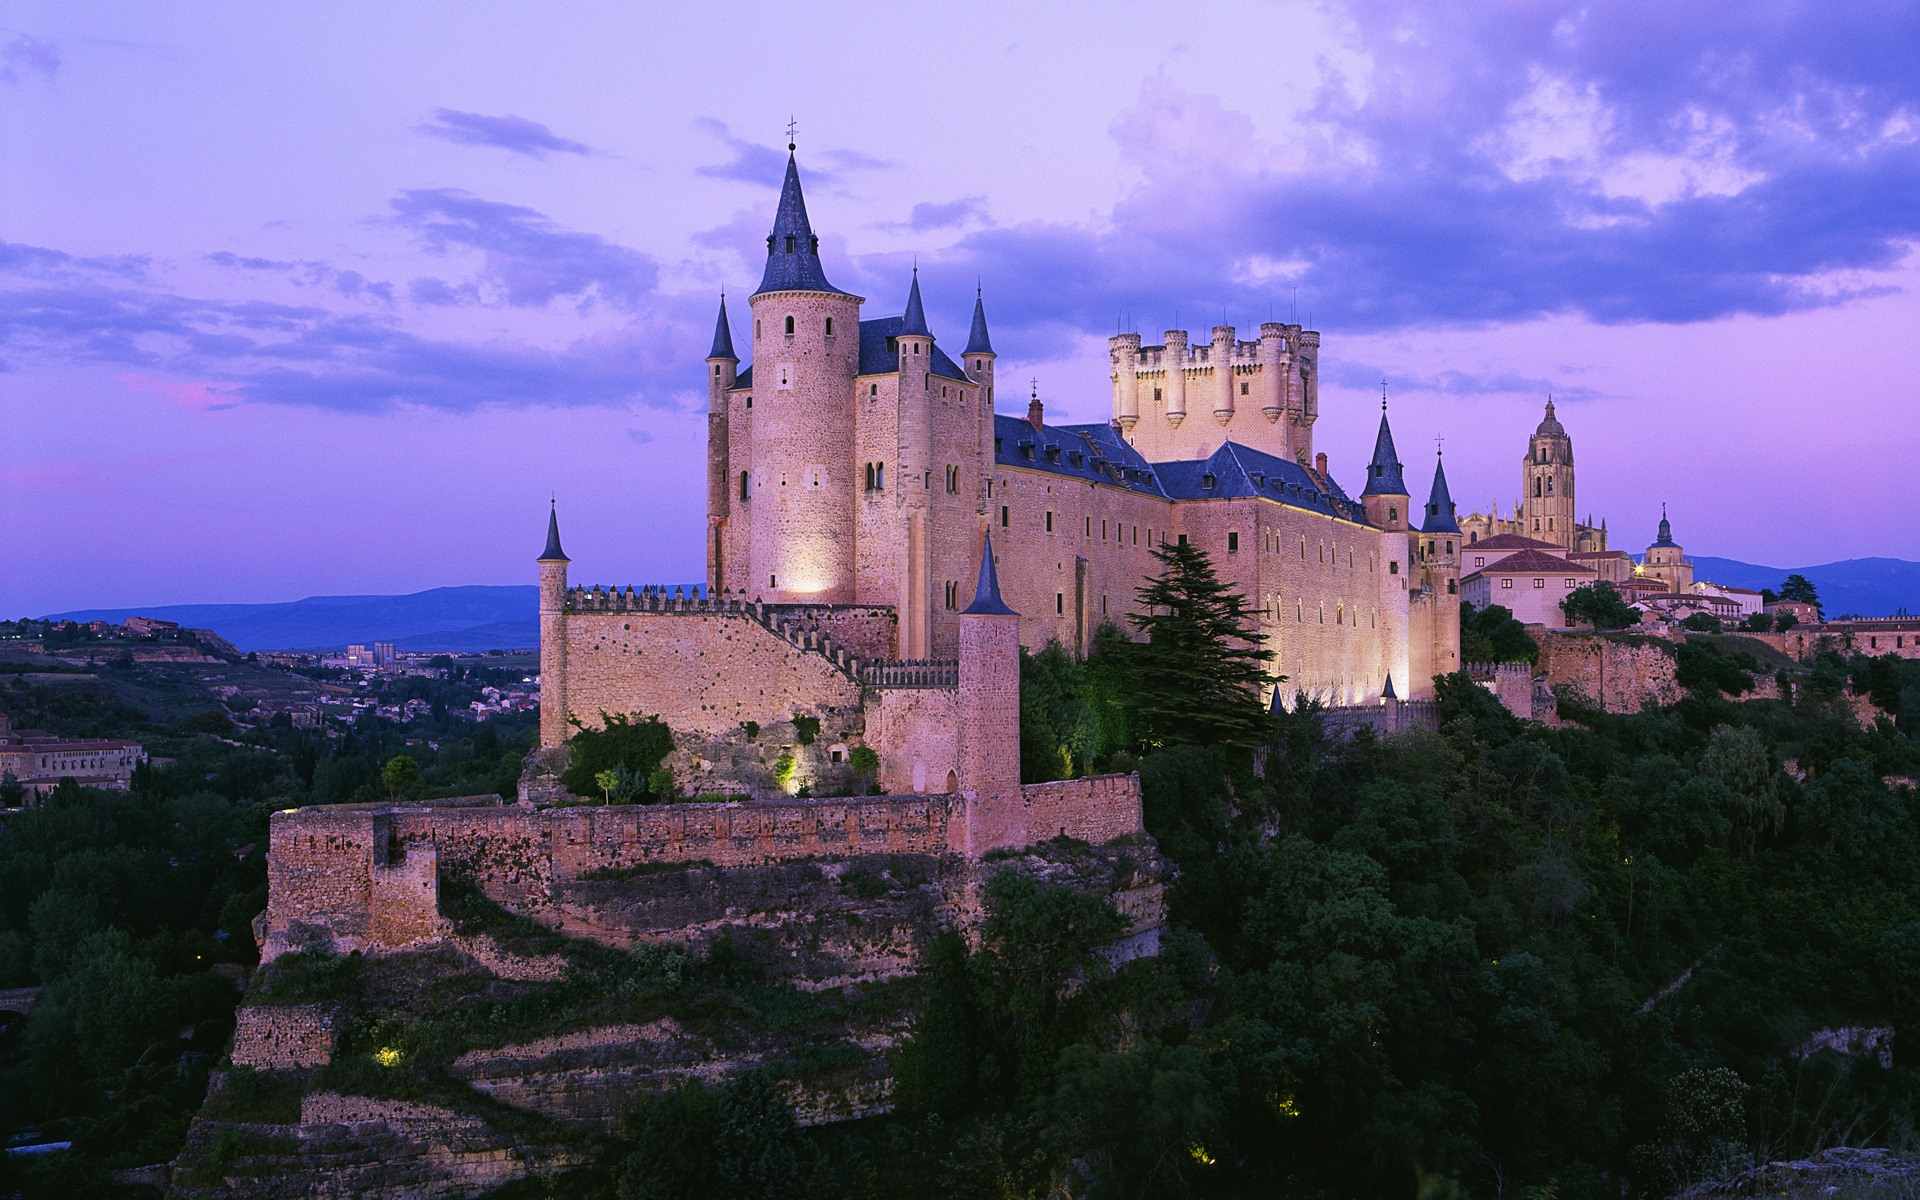 Windows 7 Wallpapers: Castles of Europe #1 - 1920x1200